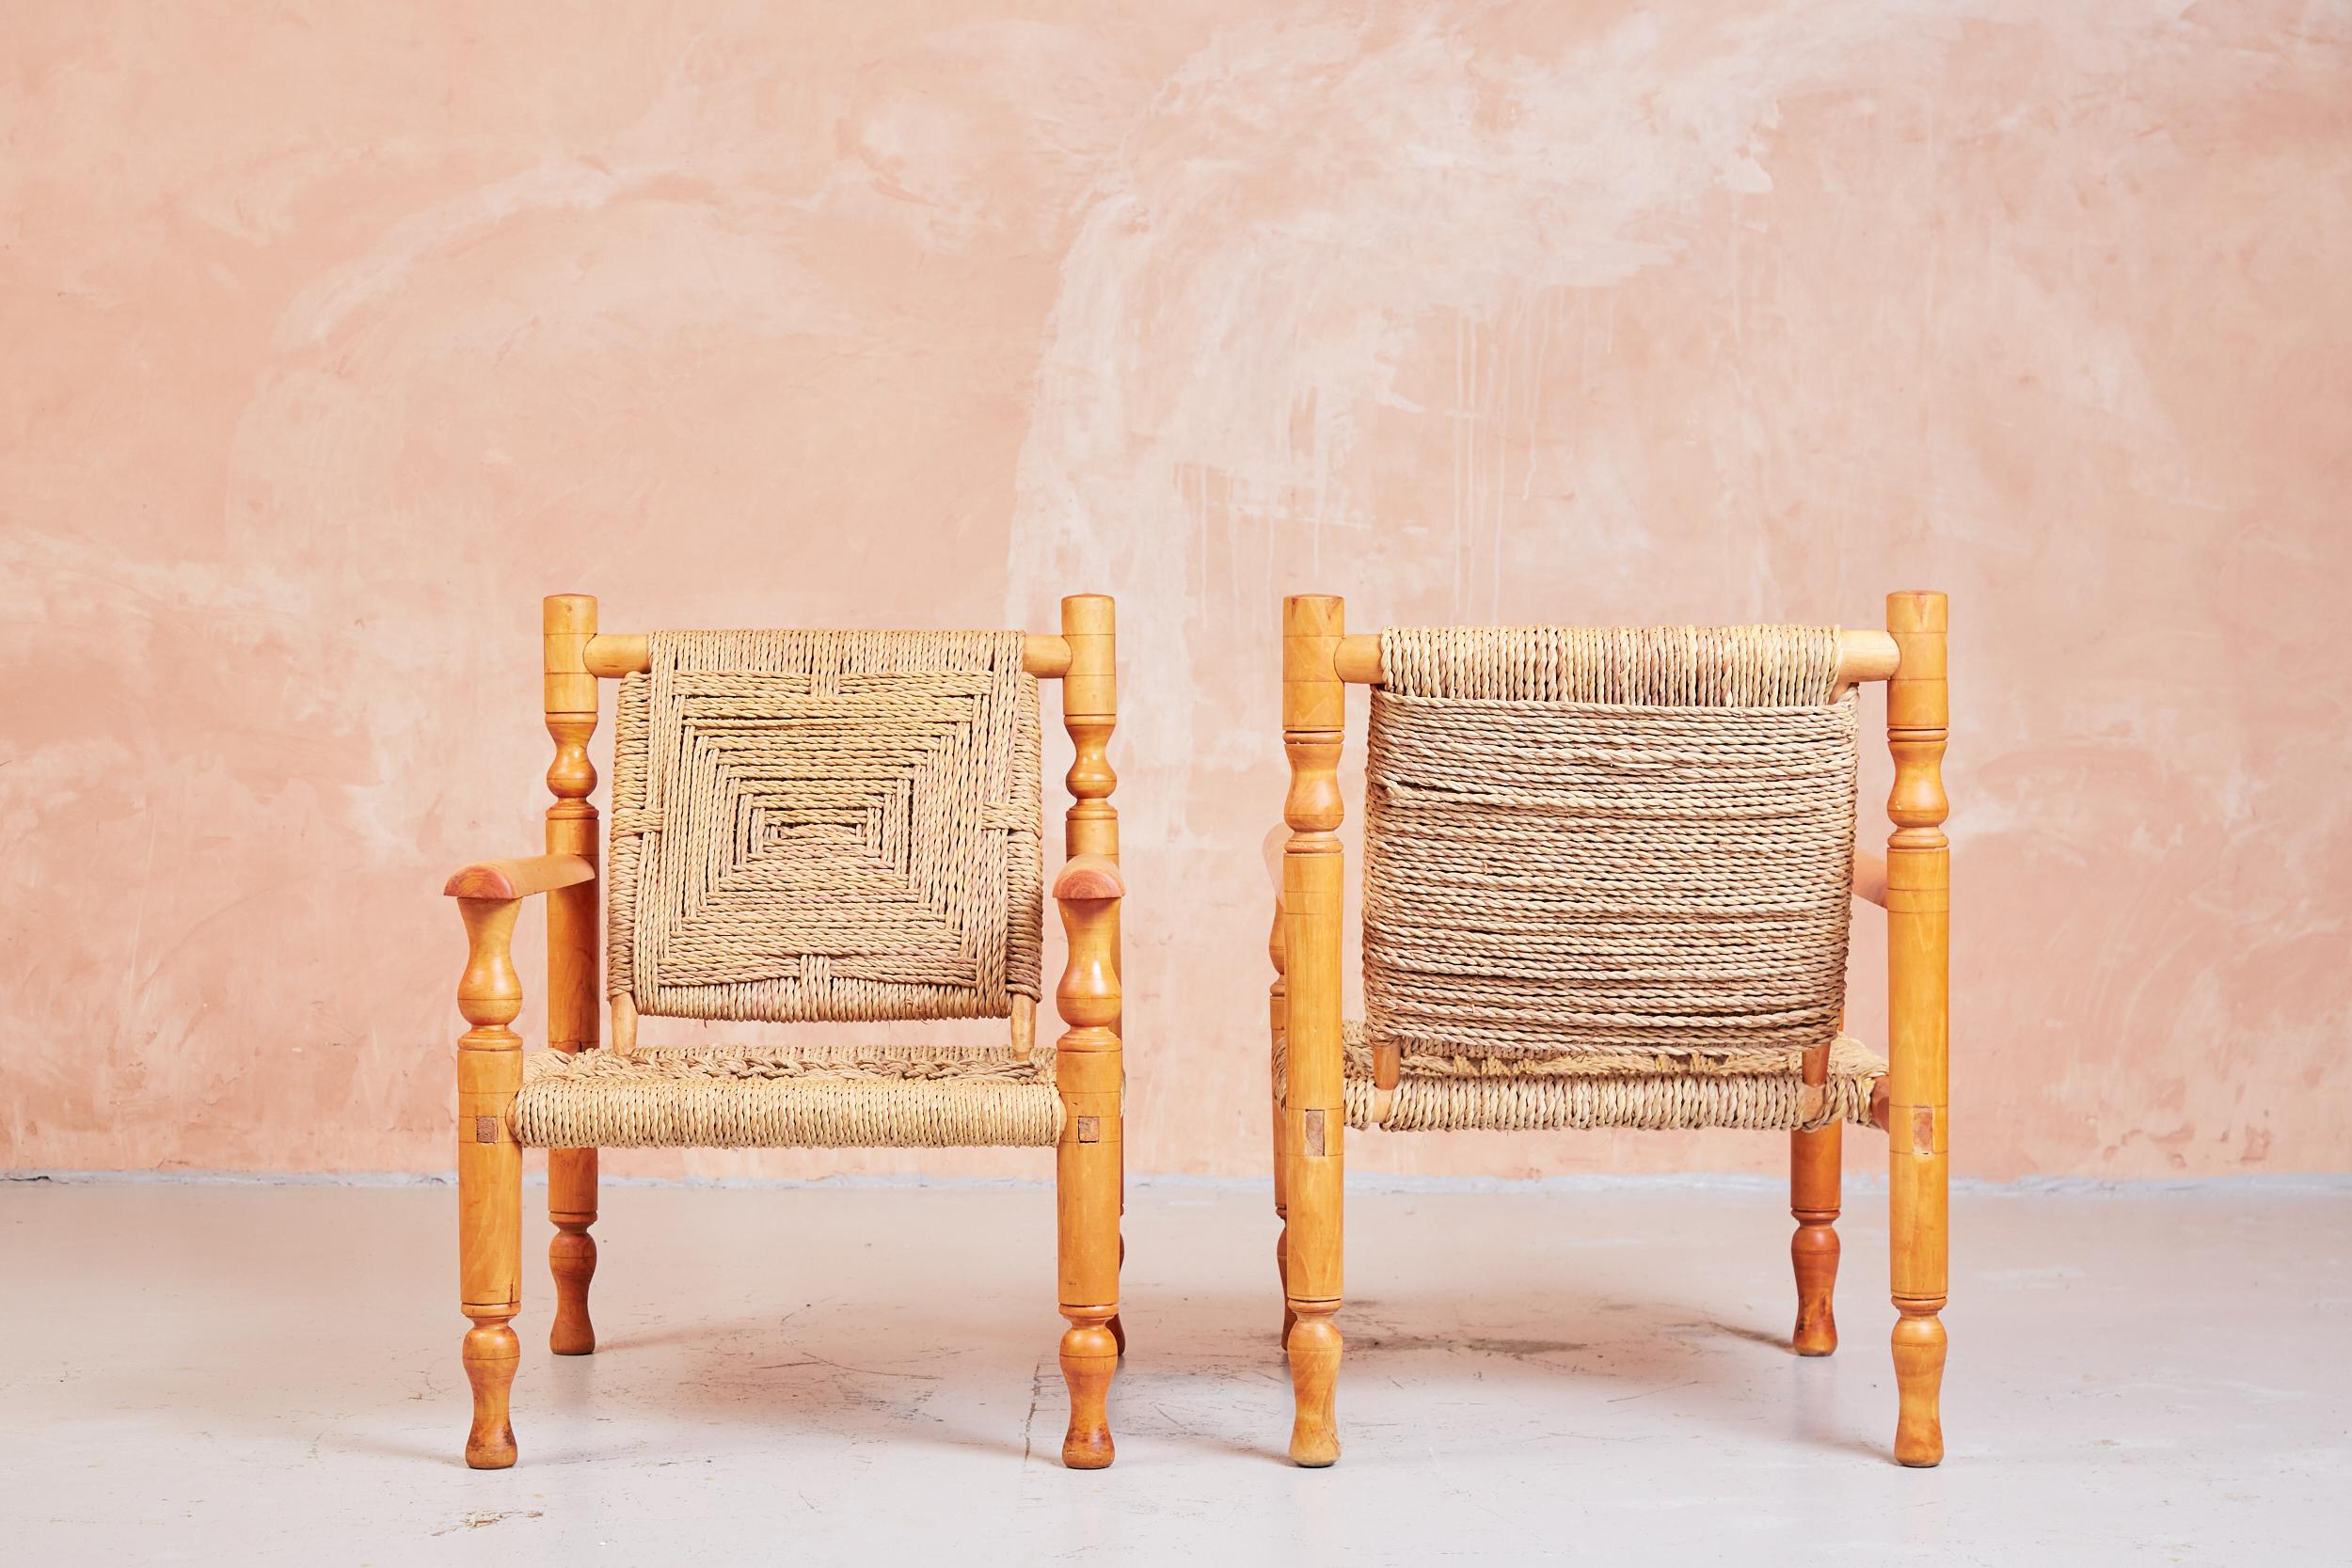 Armchairs by Adrien Audoux and Frida Minet.
Made in France, circa 1950s.
Fantastic patina to wood
Beechwood and abaca rope.

A pair of rare hand crafted Audoux Minet armchairs with footstool. They are extremely comfortable and compliment a touch of